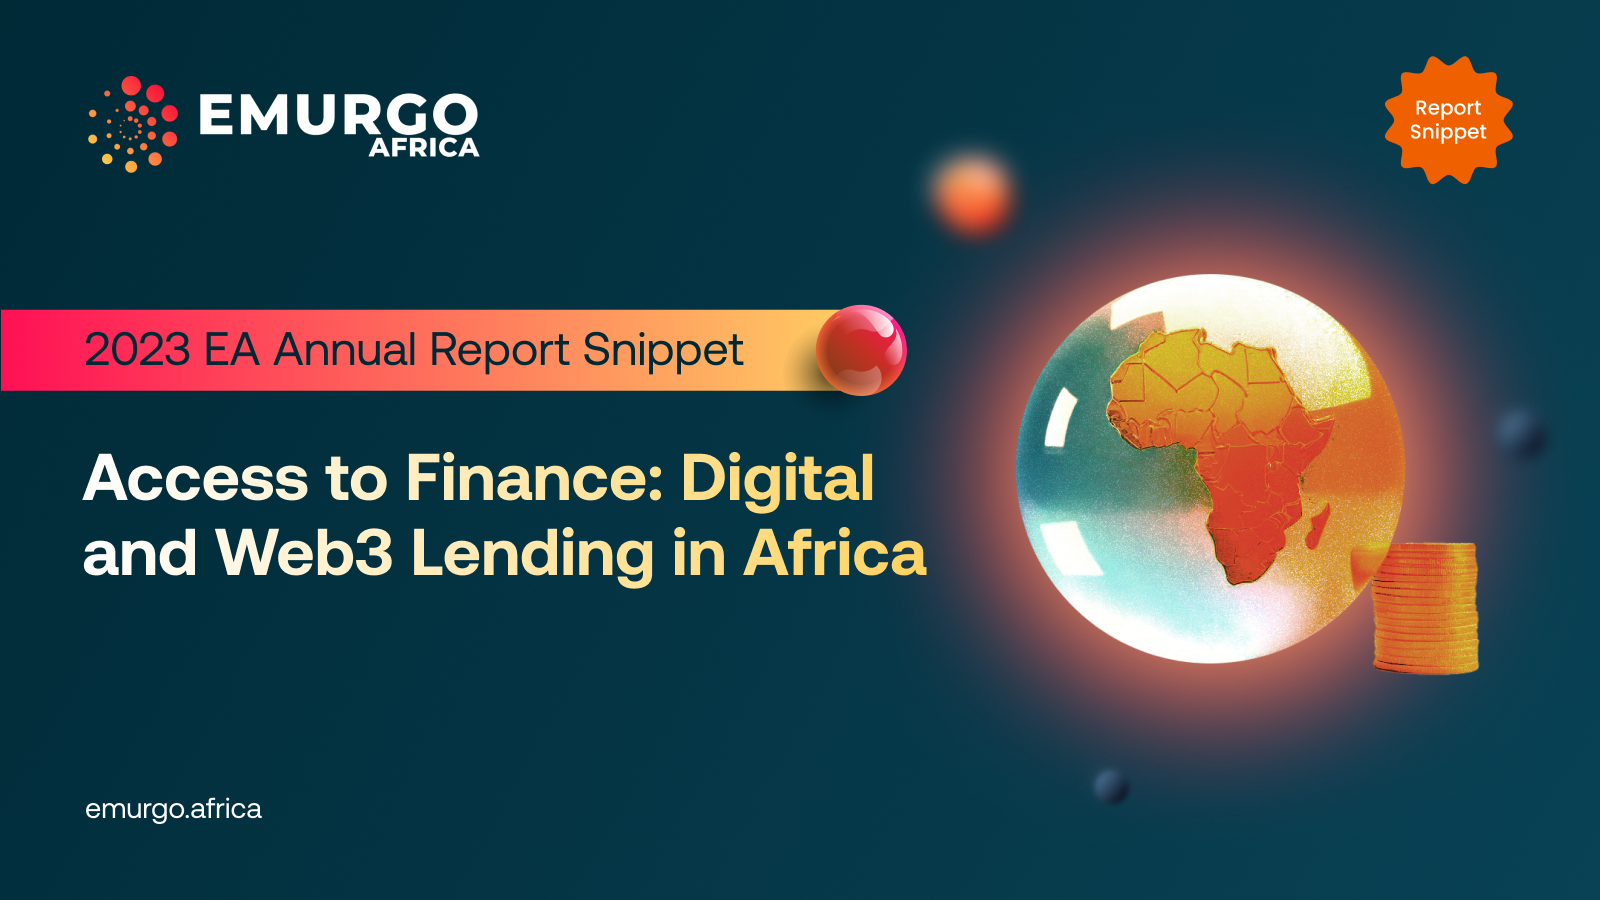 Access to Finance: Digital and Web3 Lending in Africa